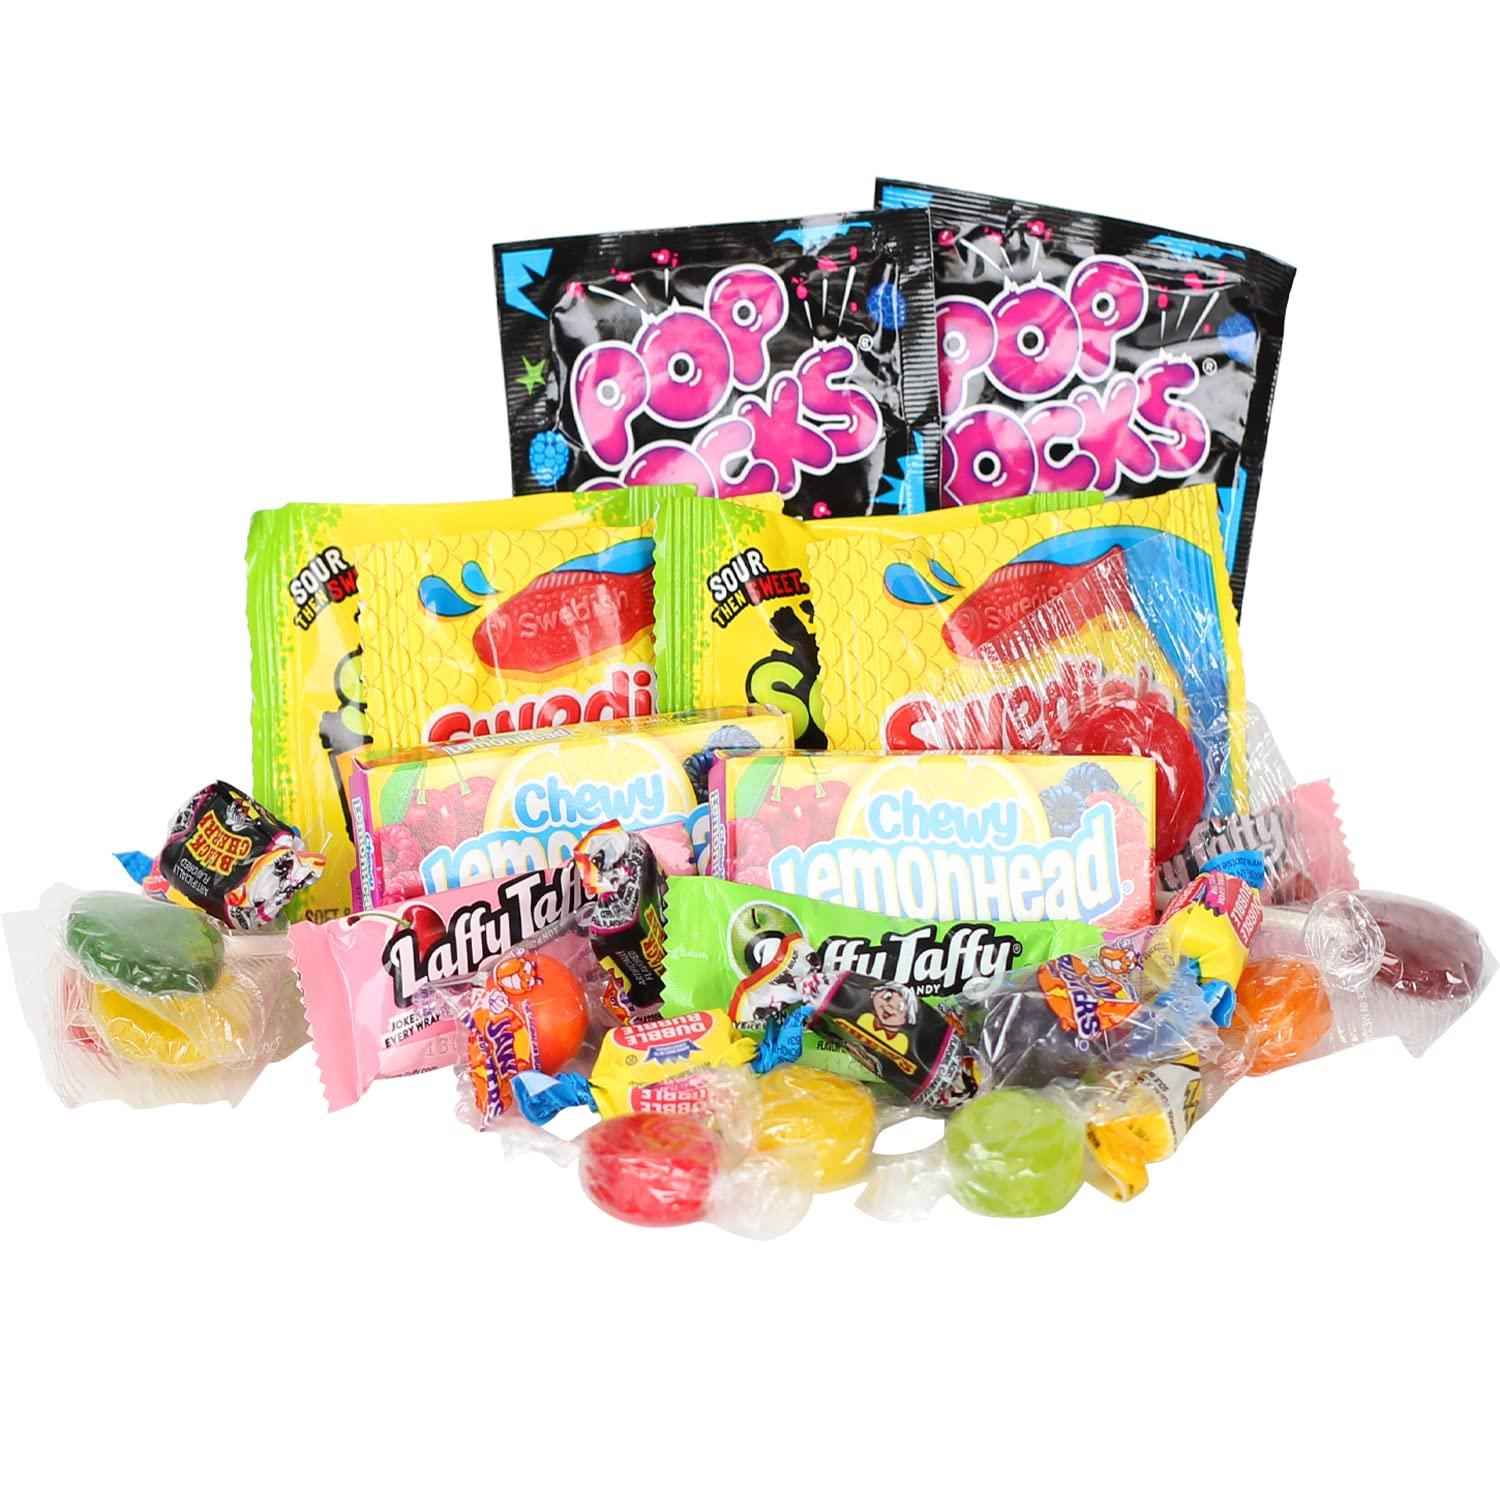 Bulk Candy - Huge Candy Assortment Party Mix - 6.5 Pounds - Over 350 Pieces of Individually Wrapped Candy